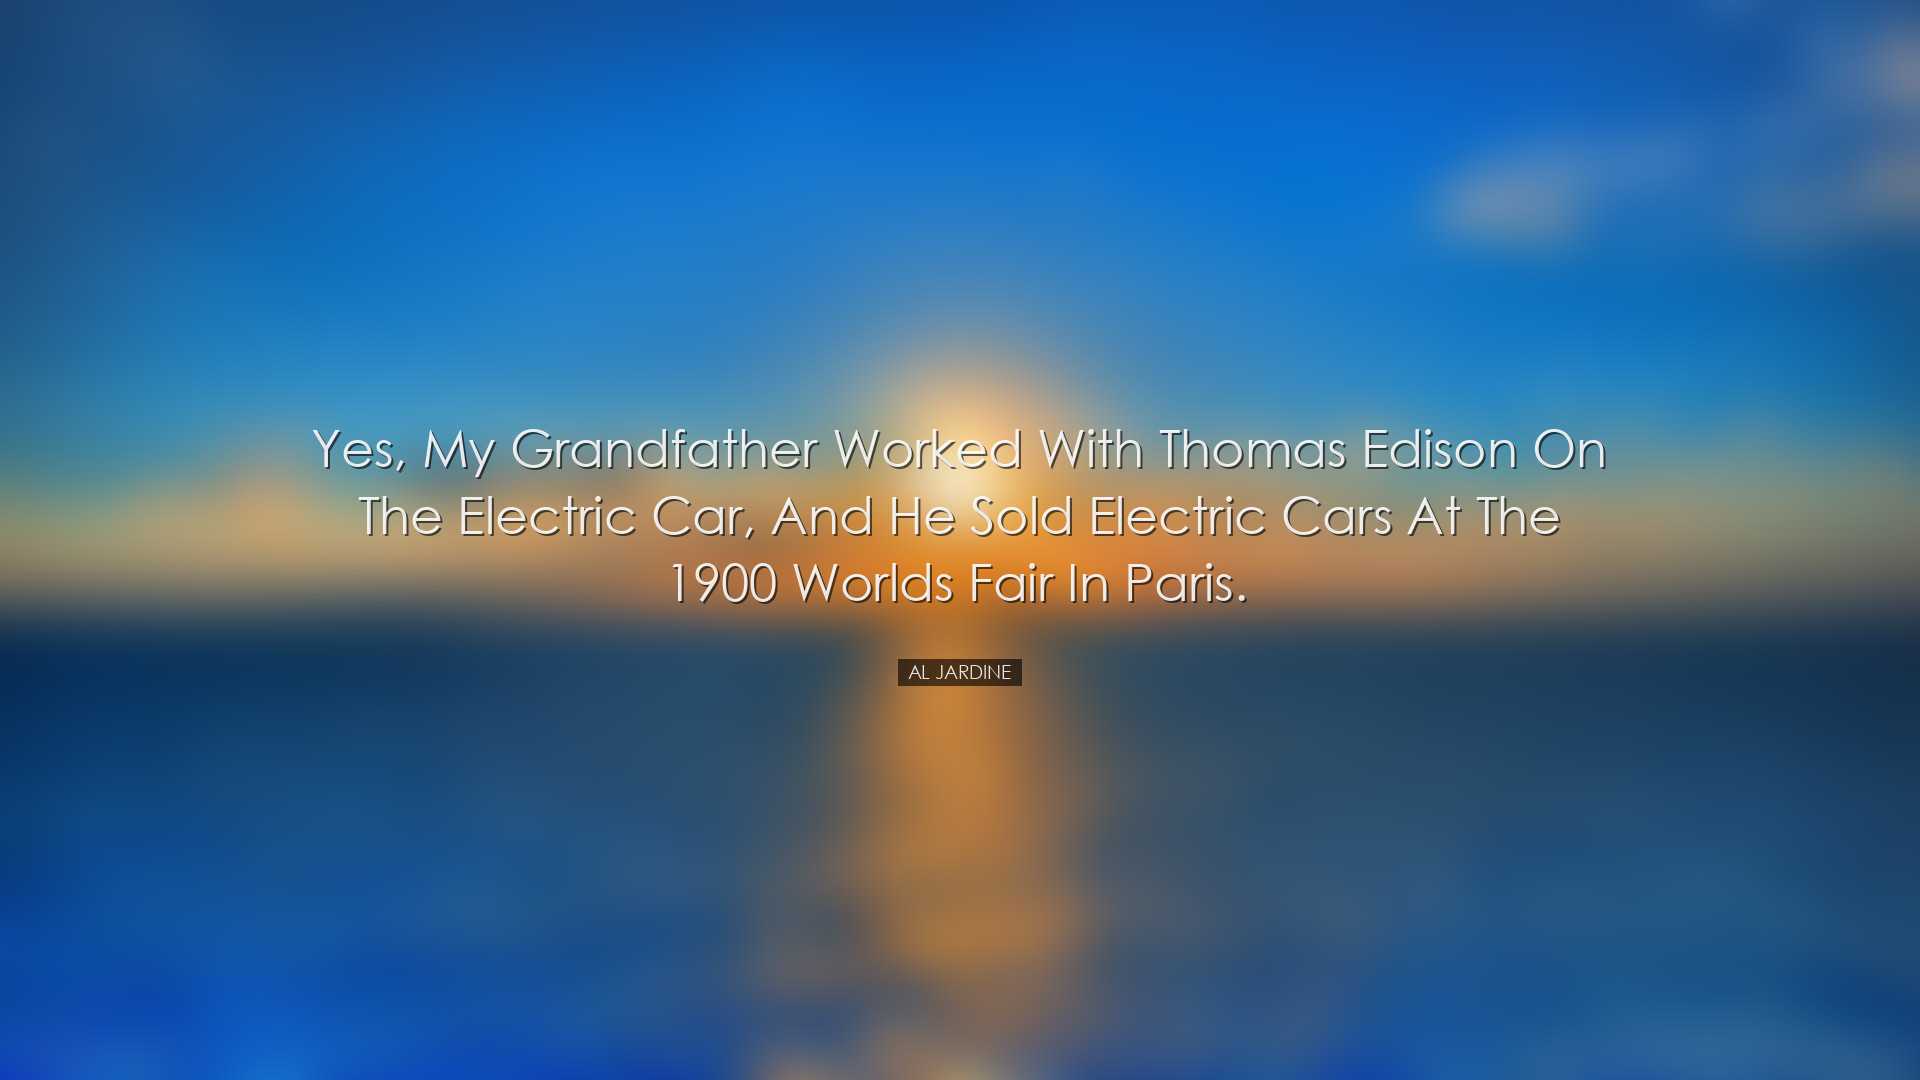 Yes, my grandfather worked with Thomas Edison on the electric car,